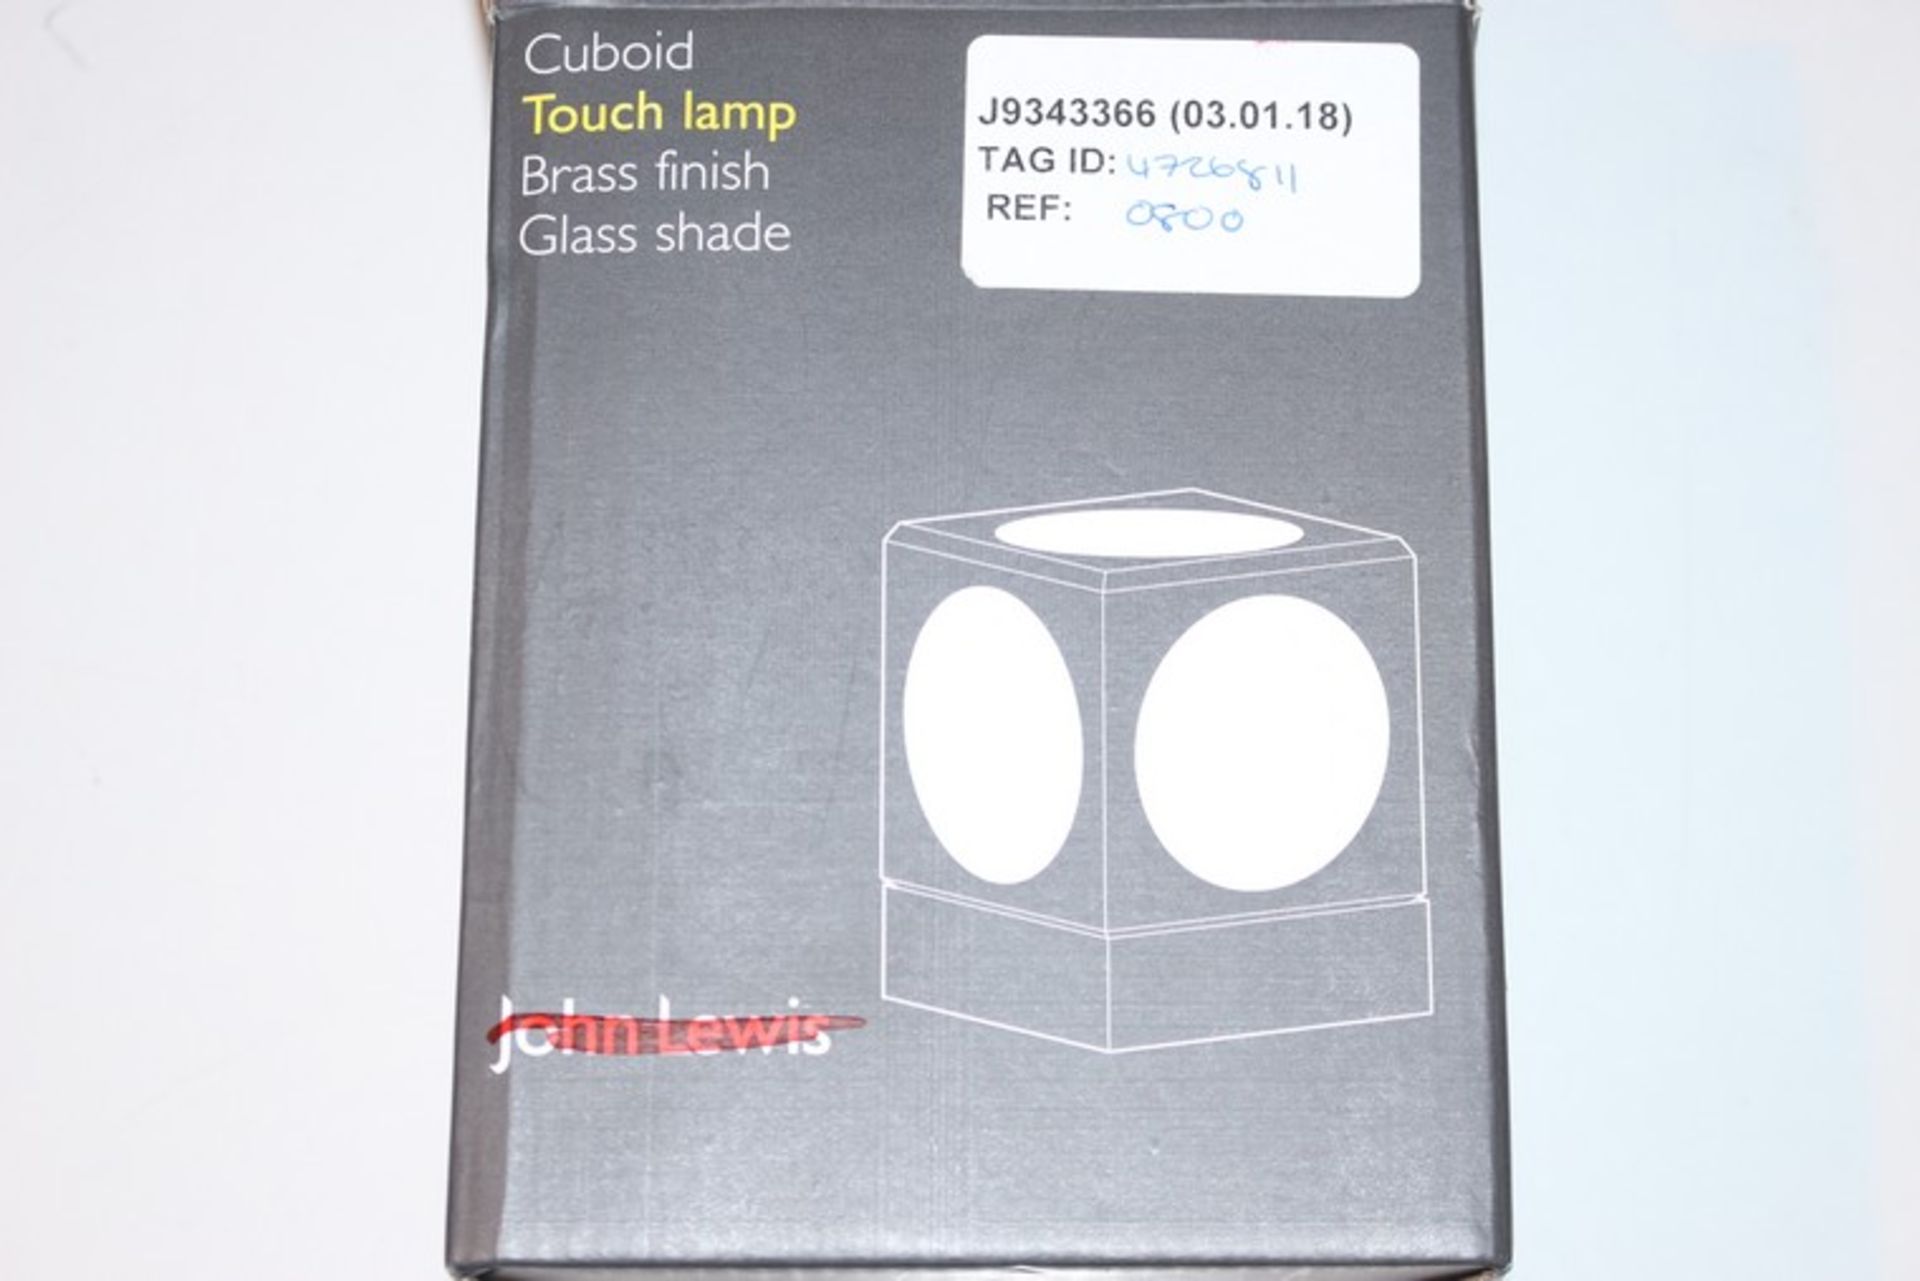 CUBOID TOUCH LAMP RRP £80 (03.01.18) 140